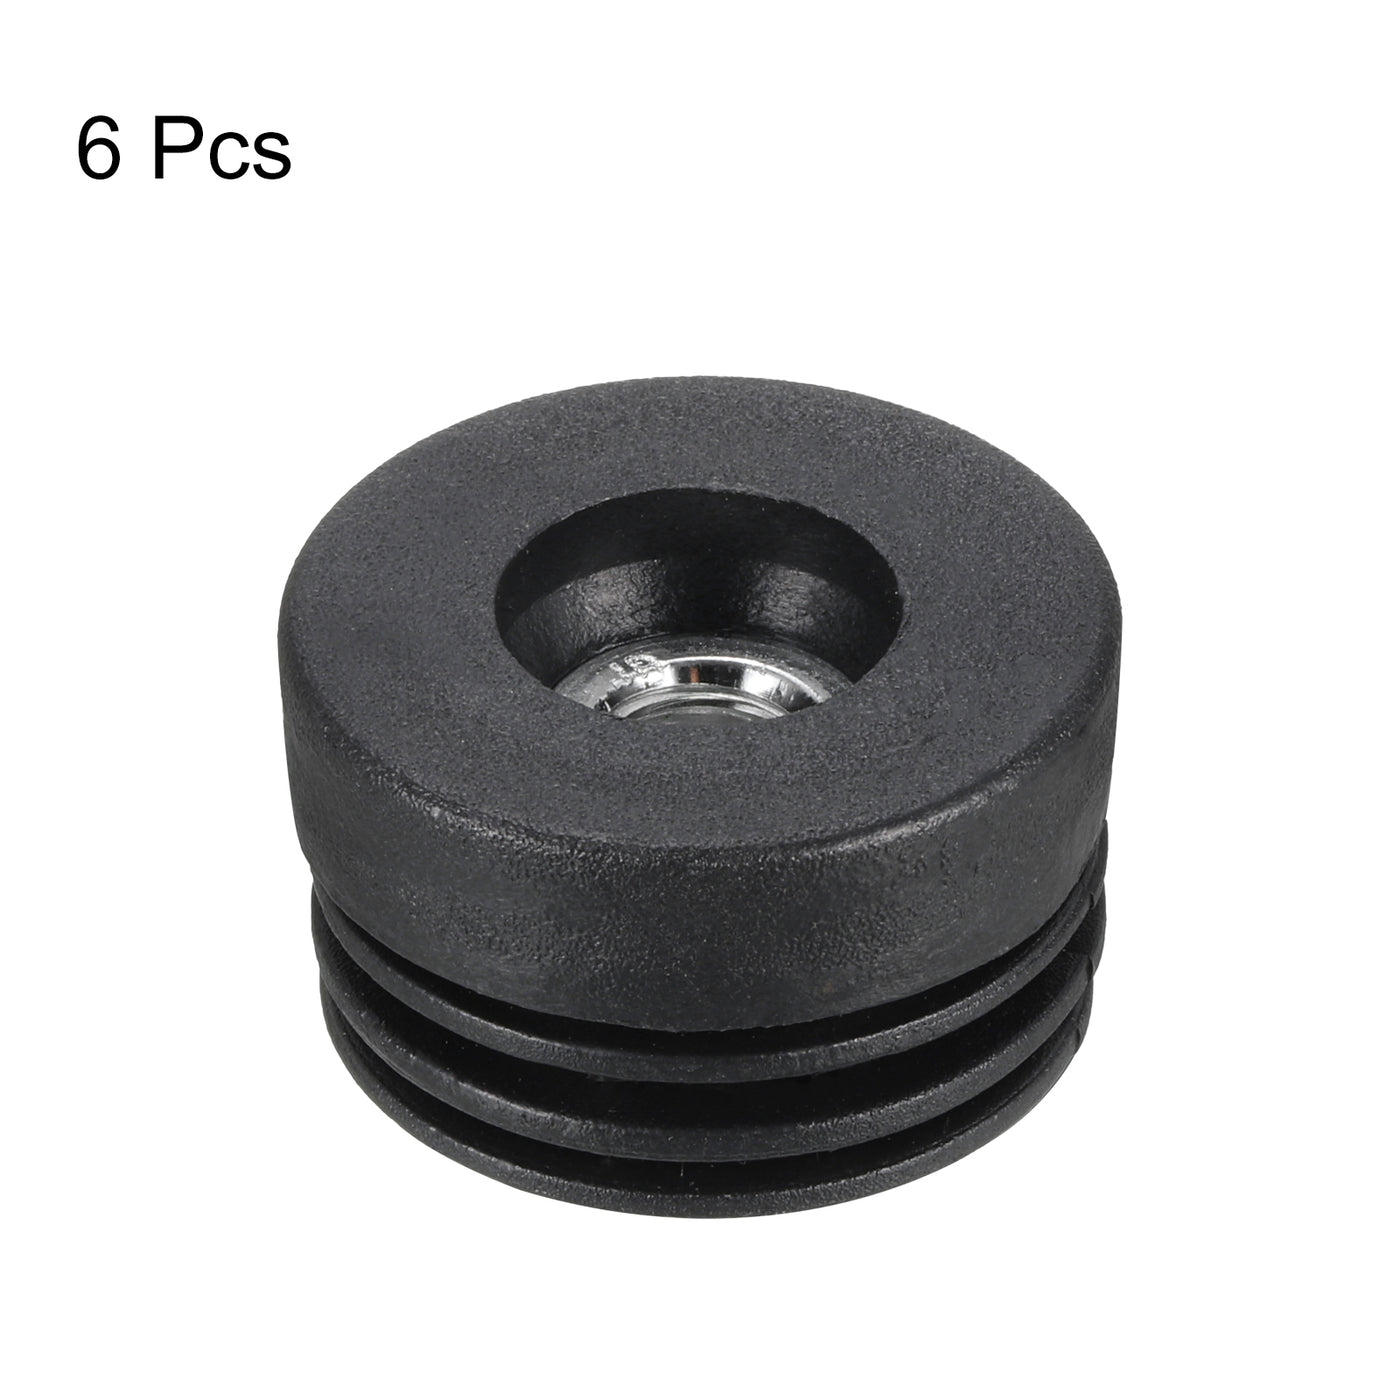 uxcell Uxcell 6Pcs Caster Insert with Thread, 38mm/1.5" M10 Thread for Furniture